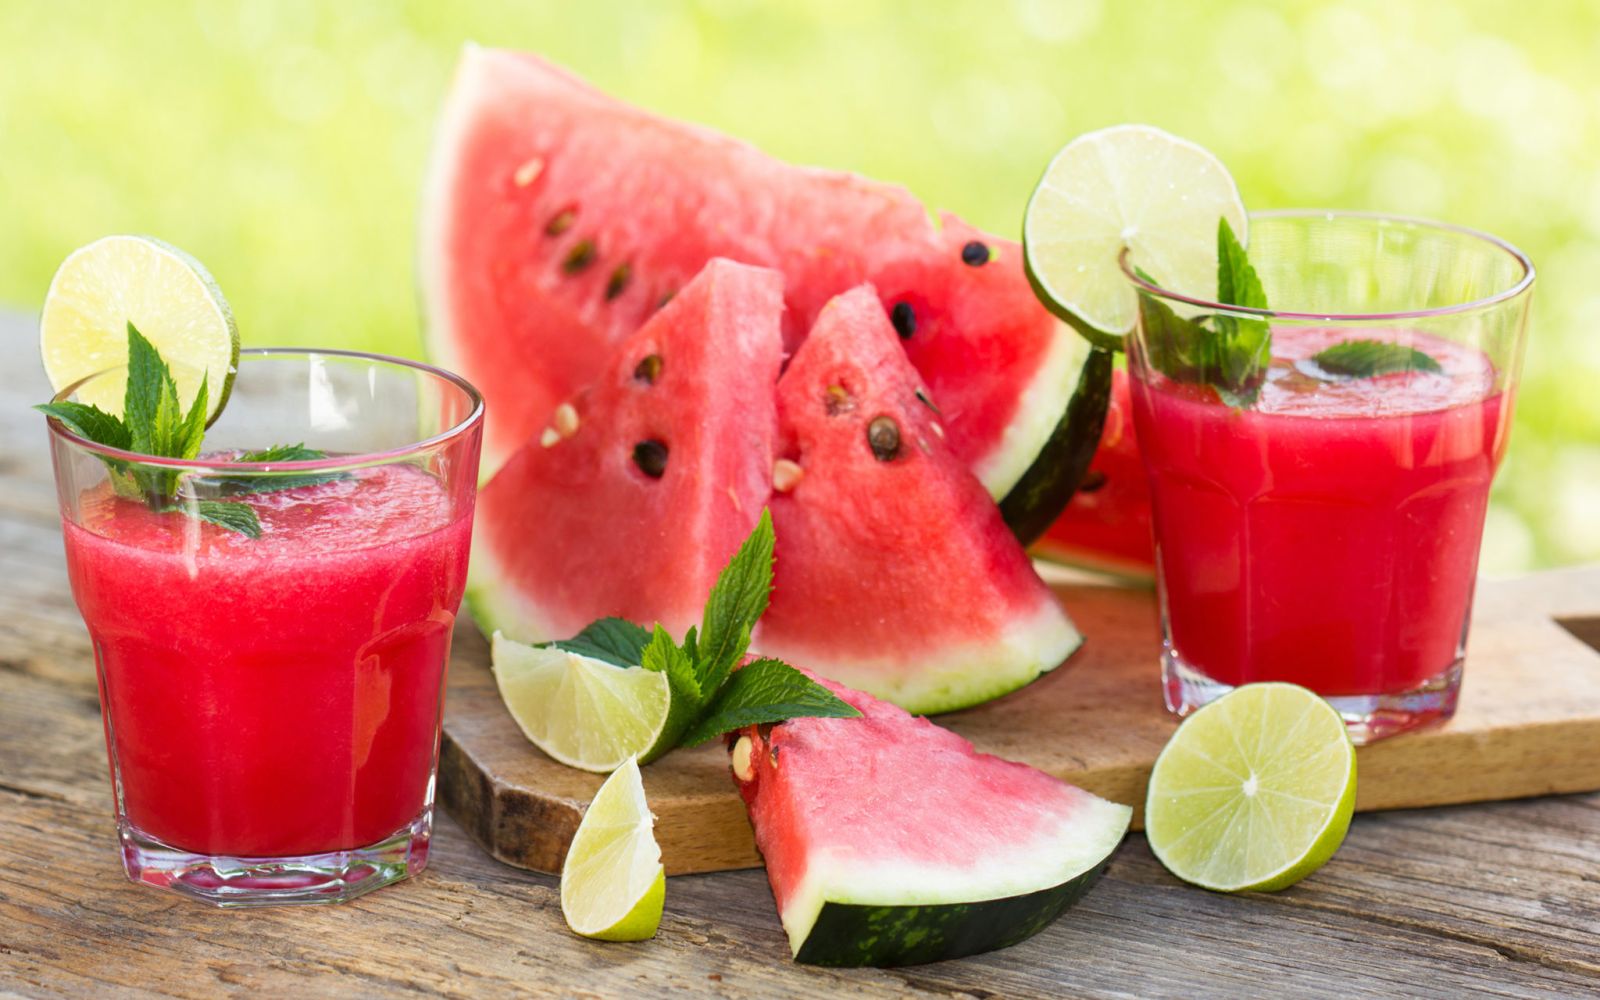 Enjoying watermelon every morning will allow more mental clarity